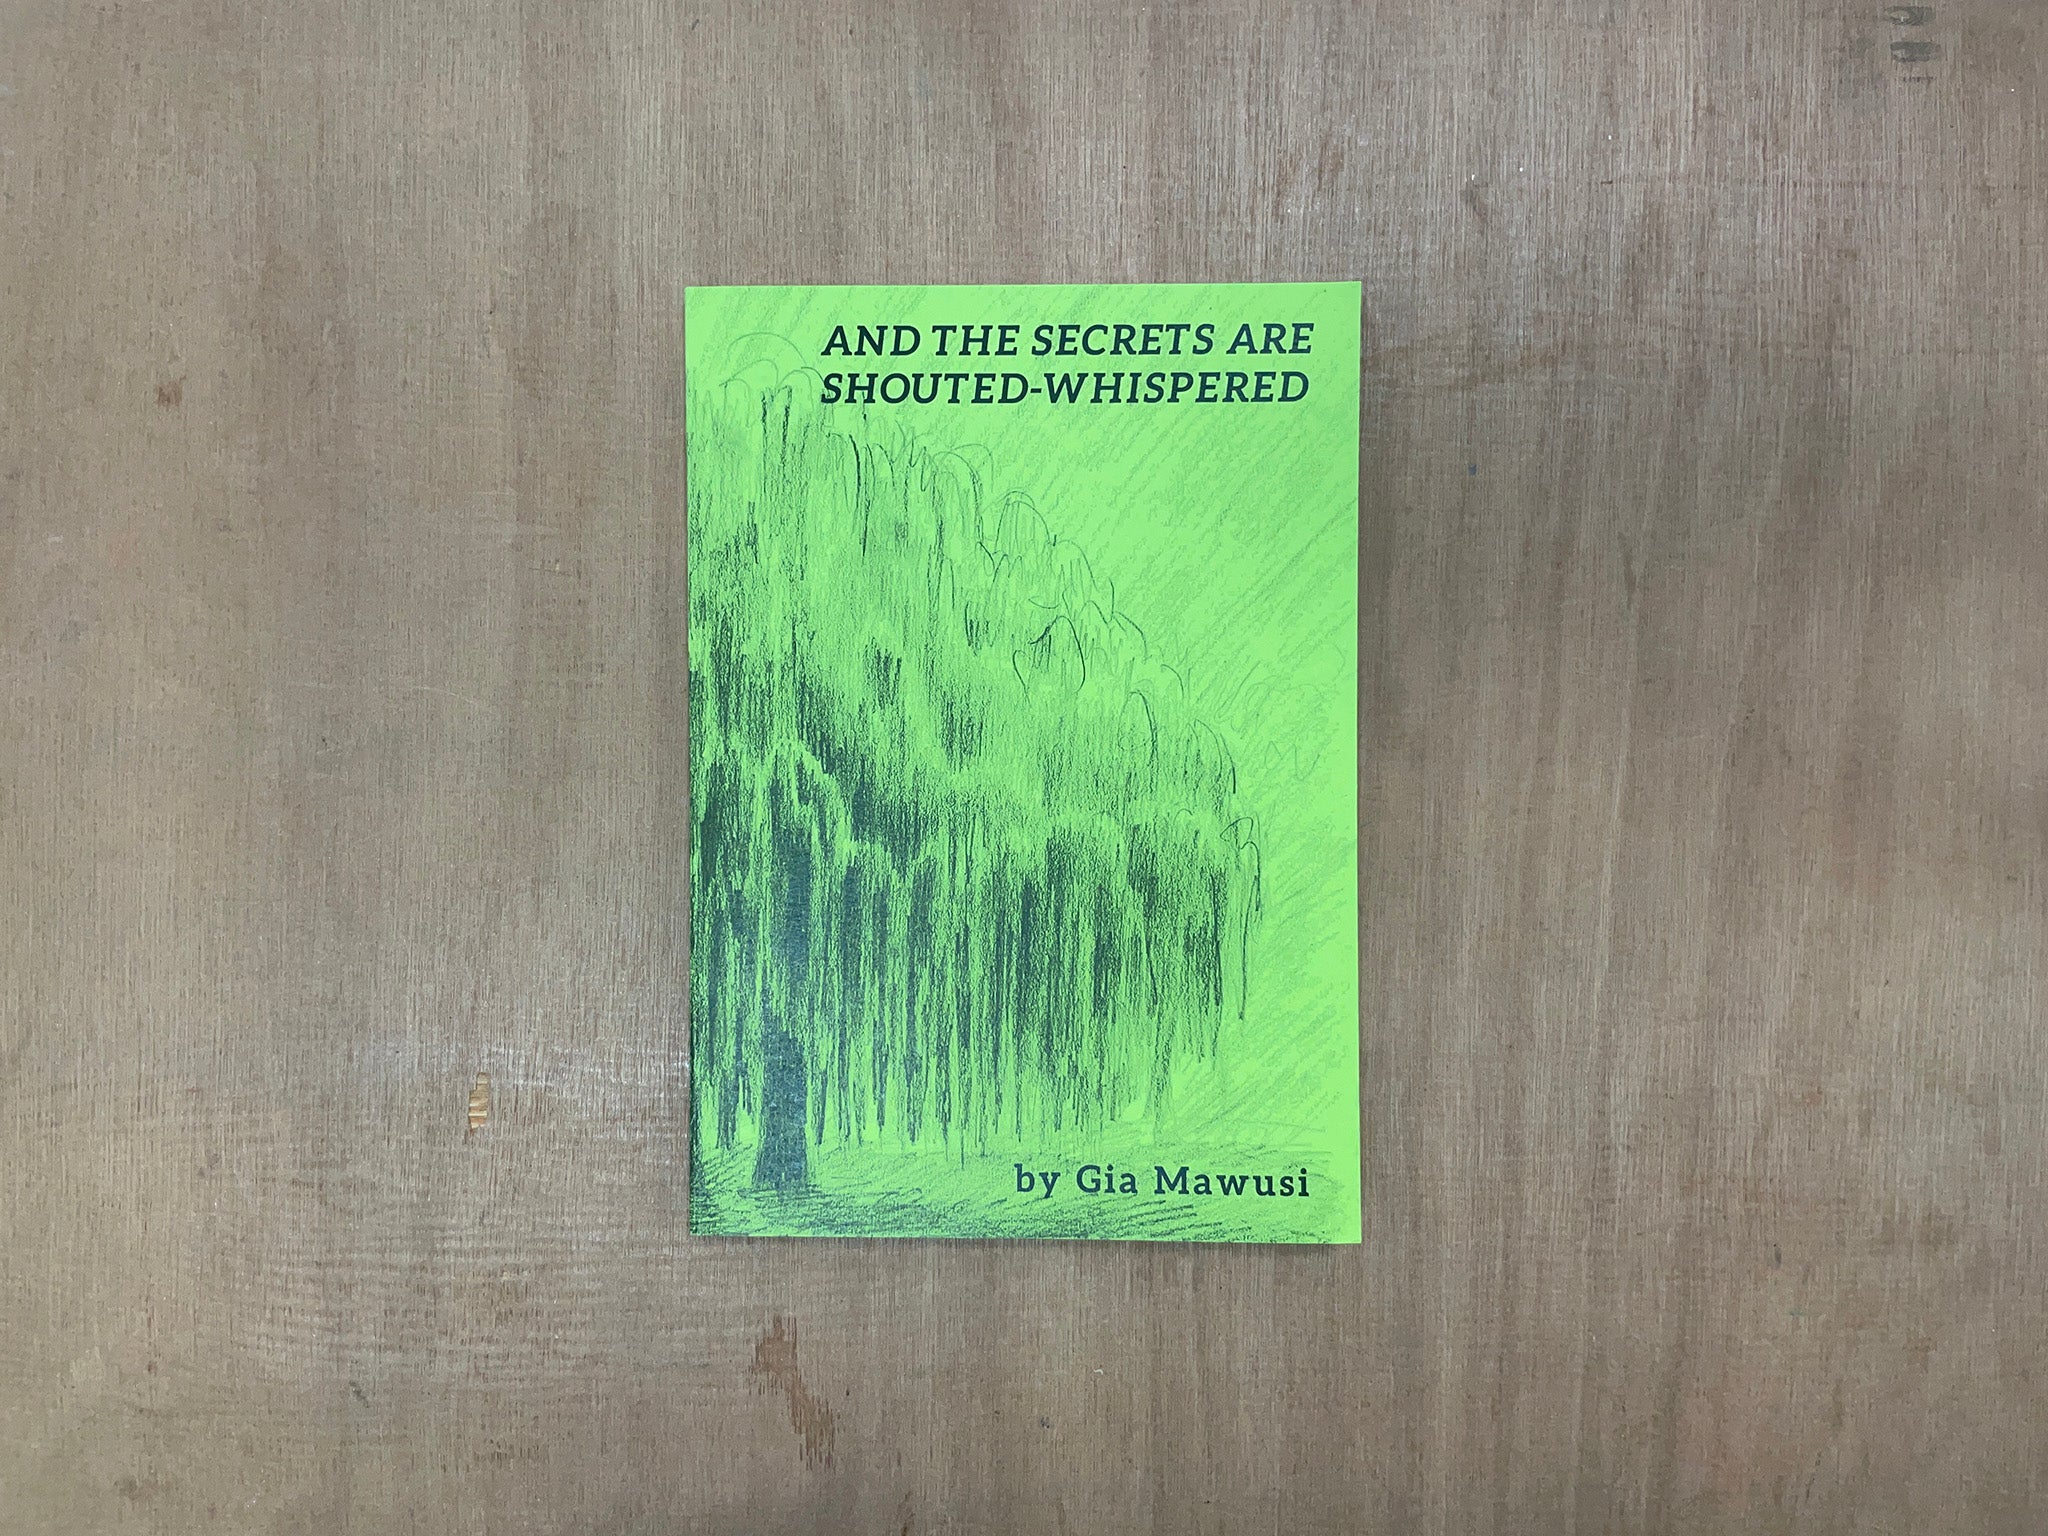 AND THE SECRETS ARE SHOUTED-WHISPERED by Gia Mawusi